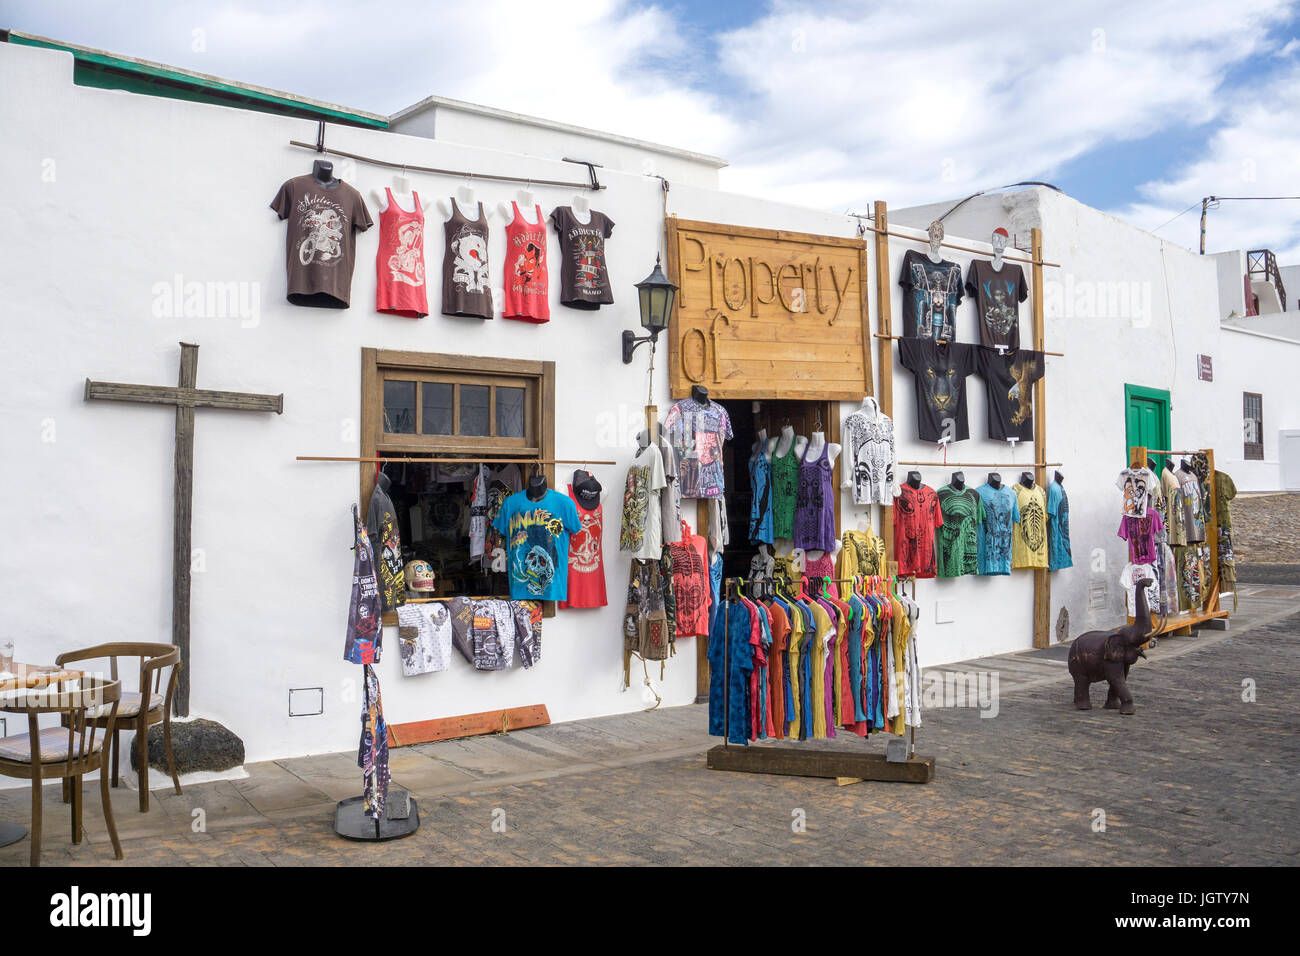 Fashion shop at Teguise, Lanzarote island, Canary islands, Spain, Europe Stock Photo